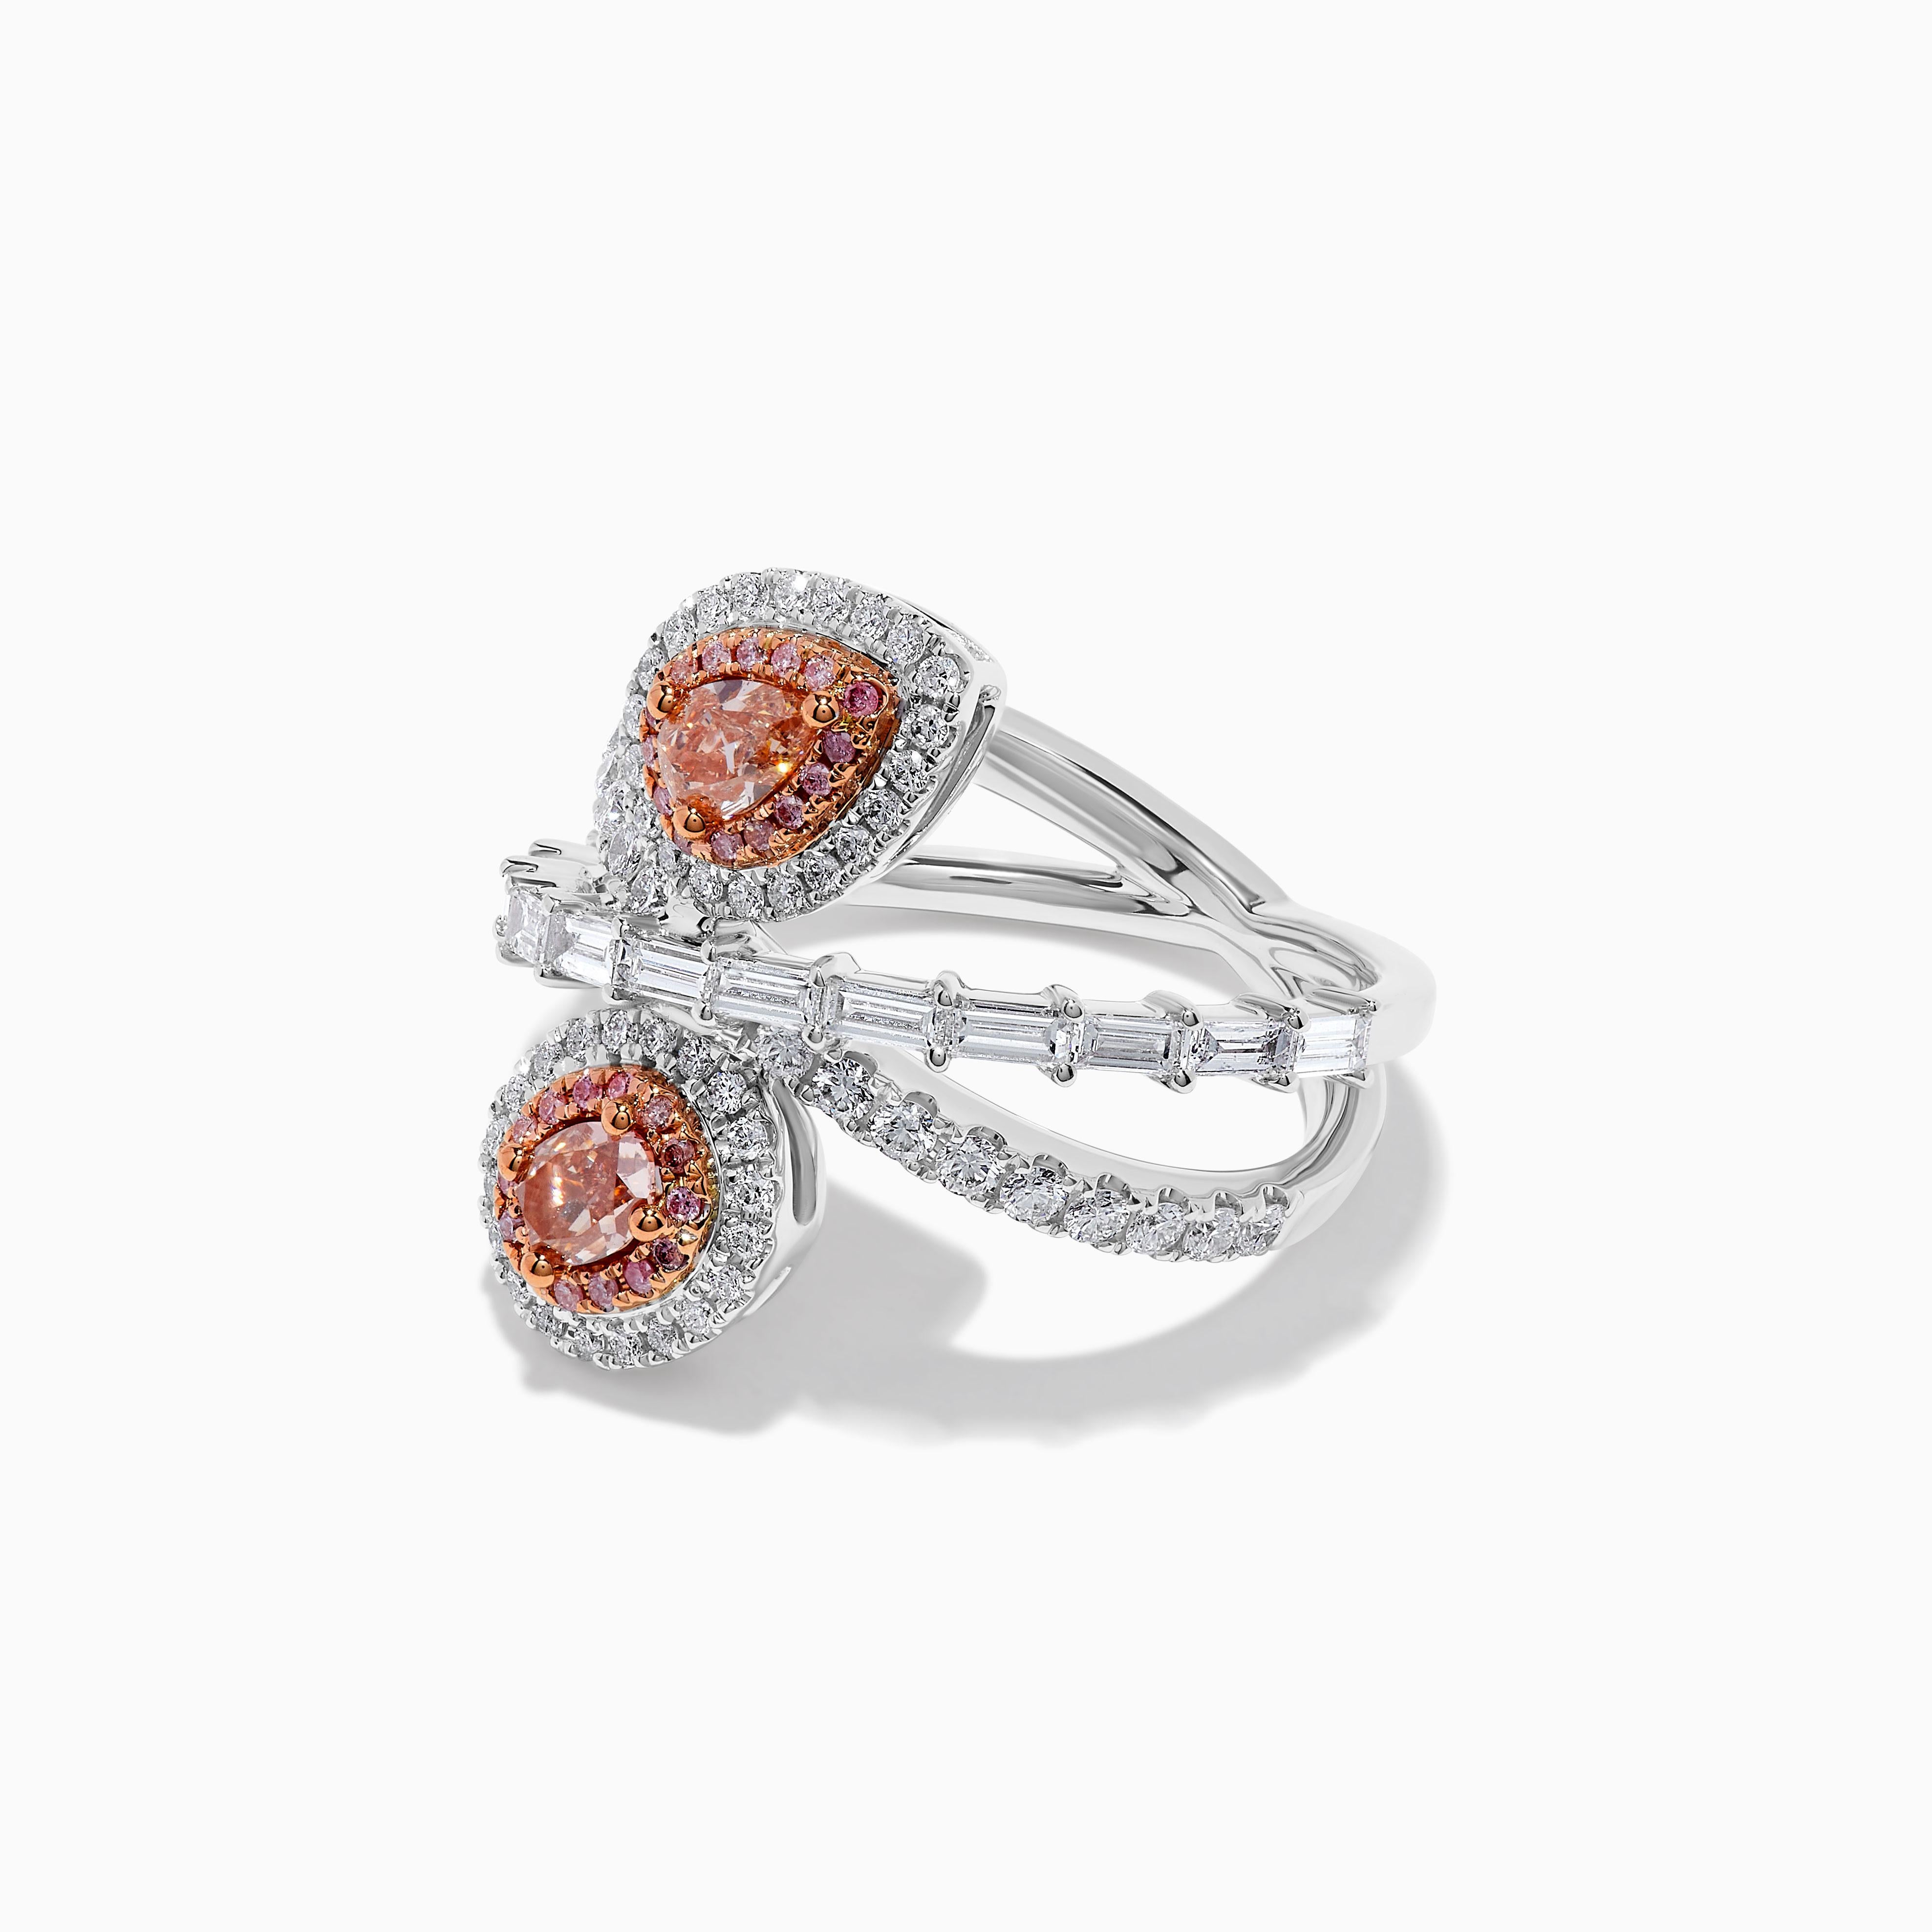 RareGemWorld's classic GIA certified diamond ring. Mounted in a beautiful 18K Rose and White Gold setting with a natural pear cut pink diamond complimented by a natural pink oval cut diamond. The diamonds are surrounded by natural baguette cut white